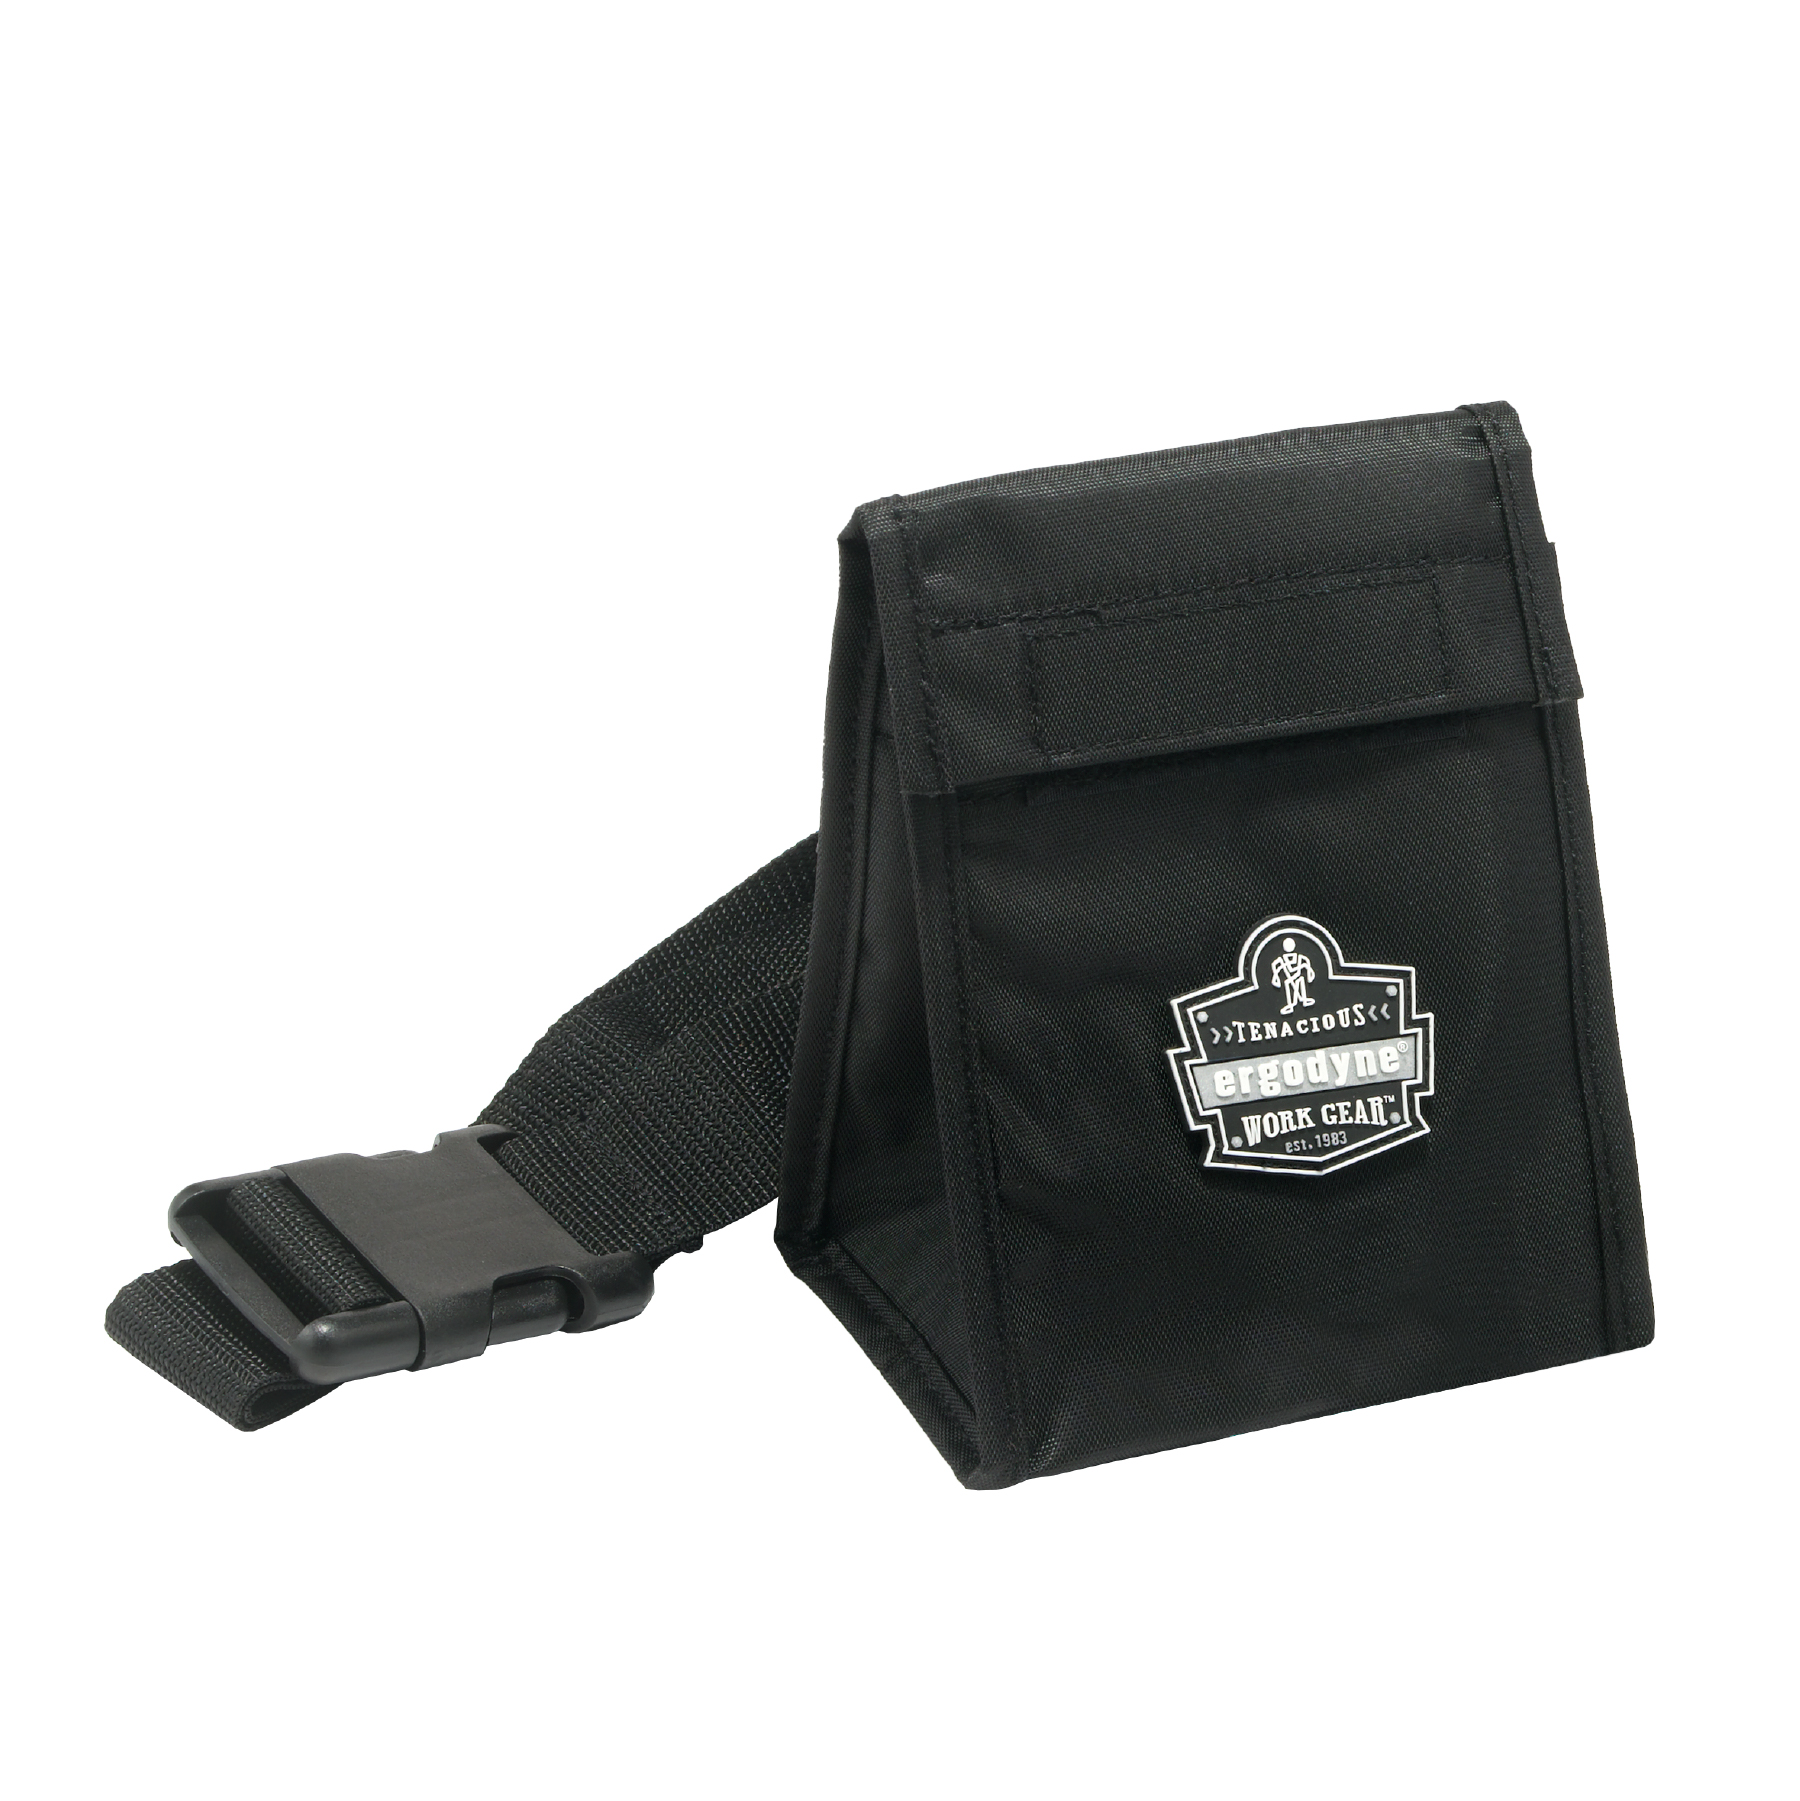 CP4 Horizontal Pouch for Tool Storage - VetoProPac